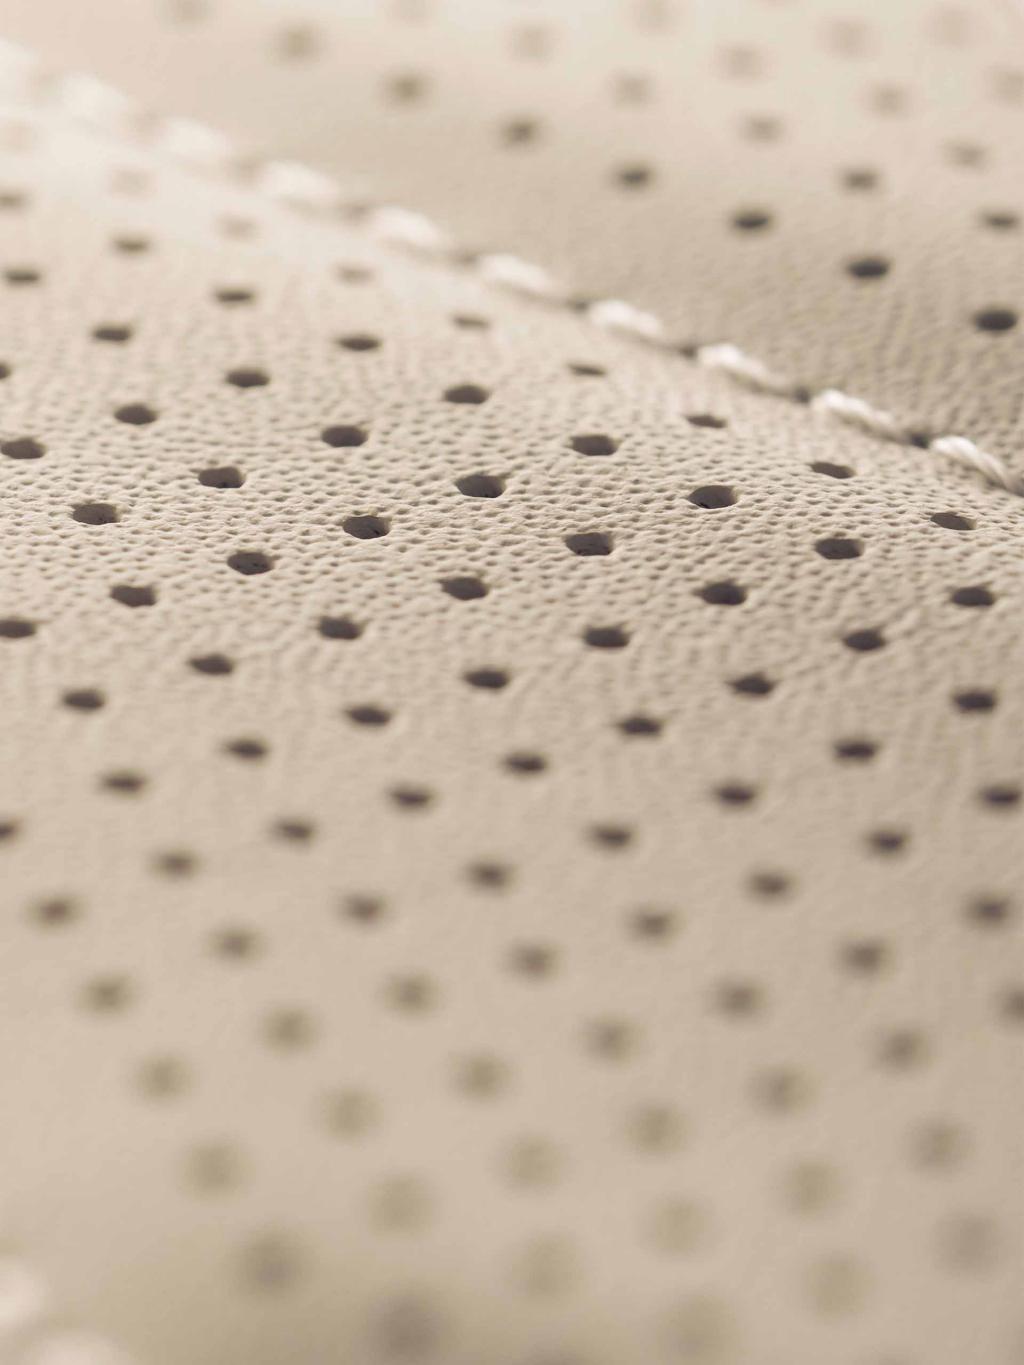 Close up view of Bentley Flying Spur Azure V8 diamond patterned seat in Linen/Magnolia hide.